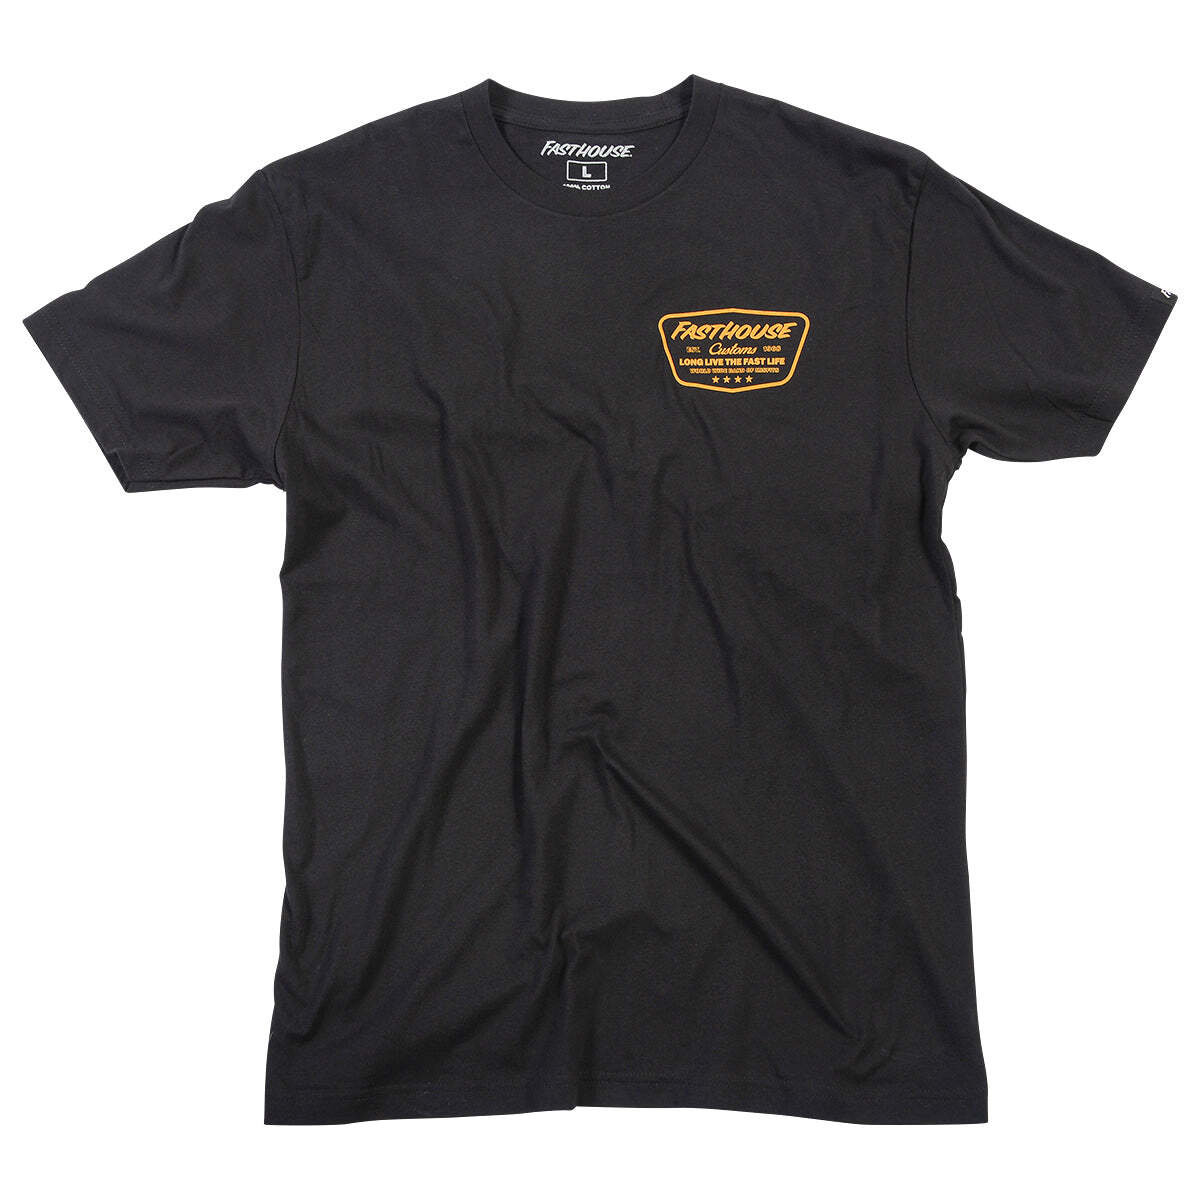 Fasthouse Crest Tee - Black - FASTHOUSE